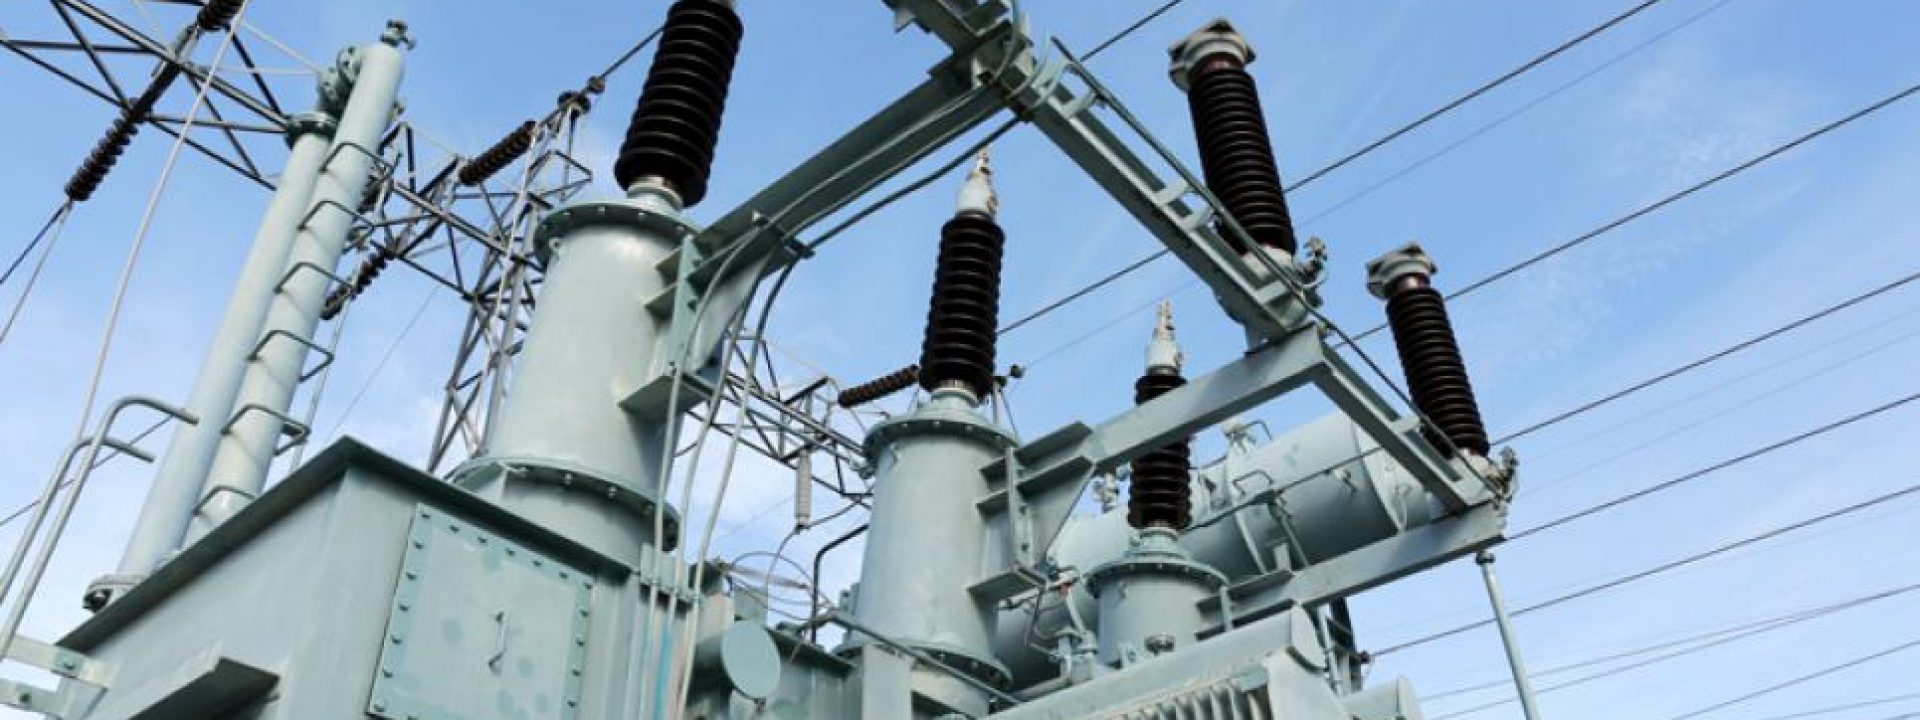 ELECTRICAL TRANSFORMERS, FAULTS, INSULATION AND PROTECTION